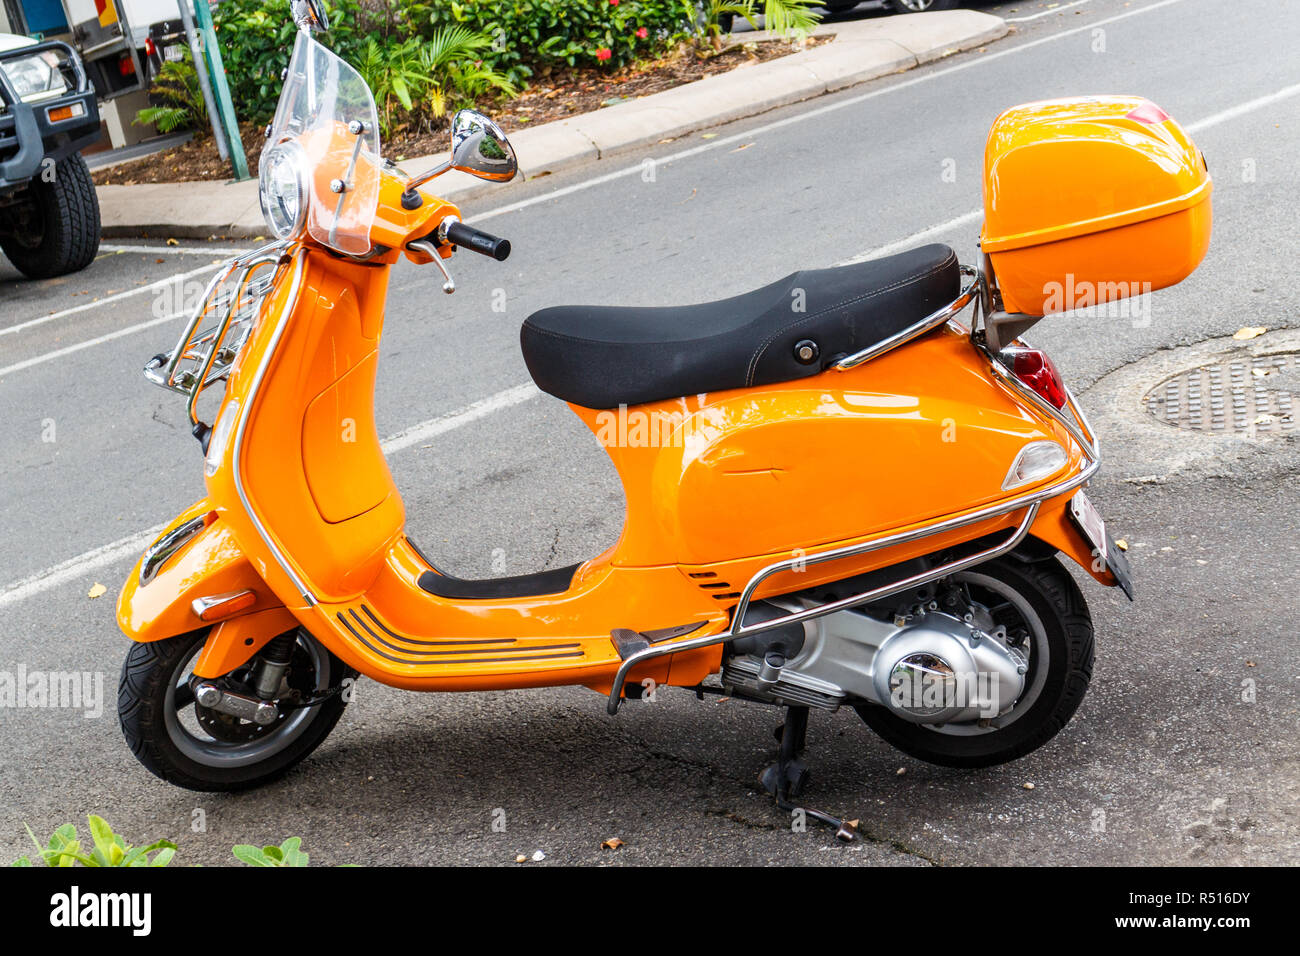 Bright orange coloured scooter parked on street Stock Photo